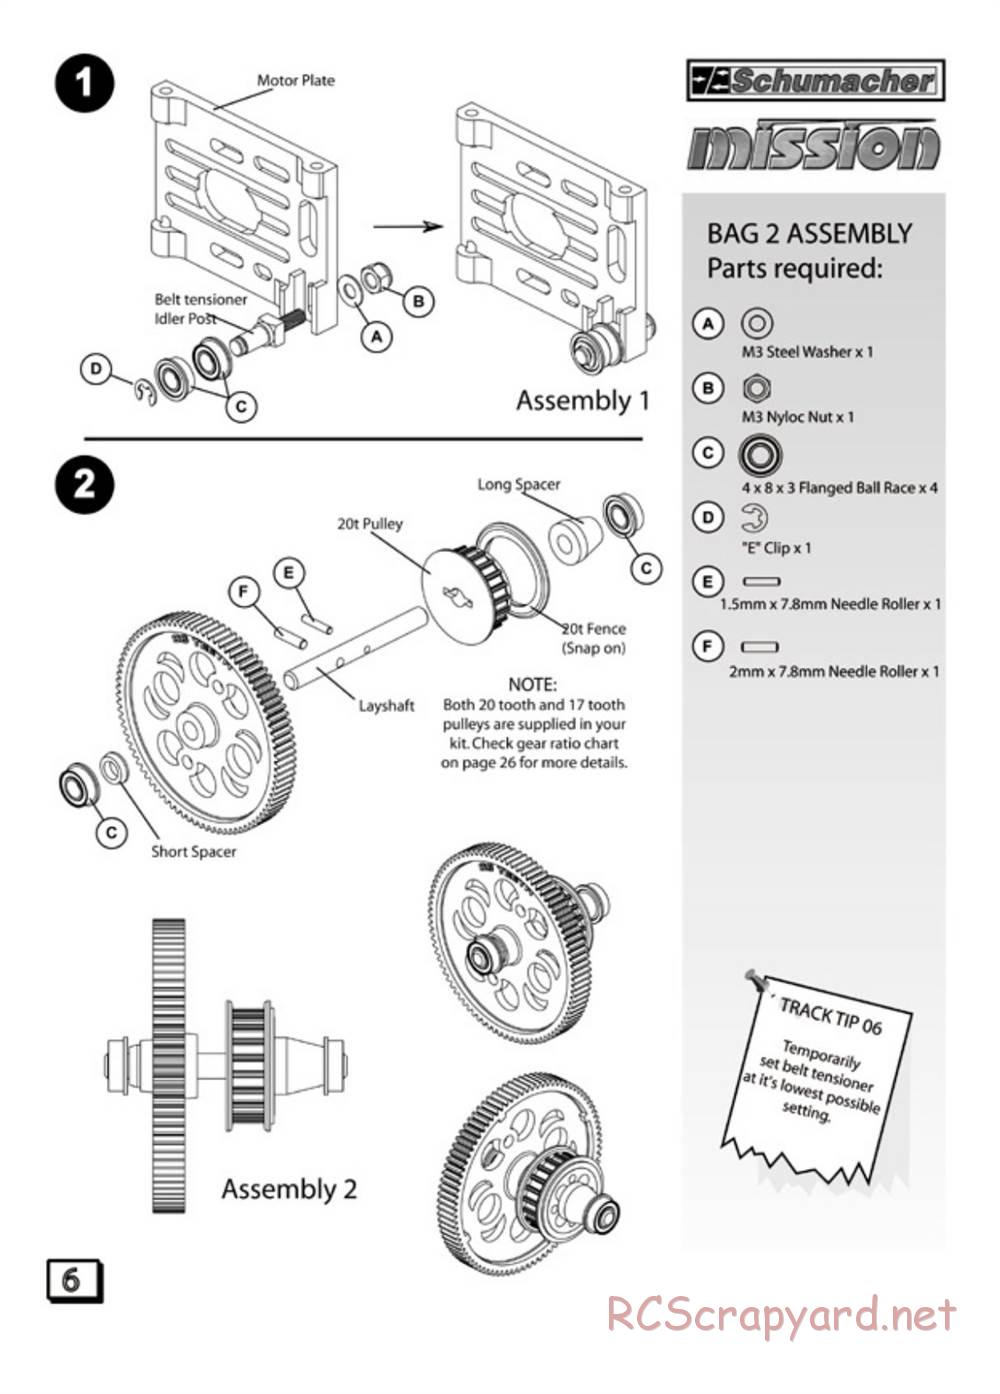 Schumacher - Mission - Manual - Page 7